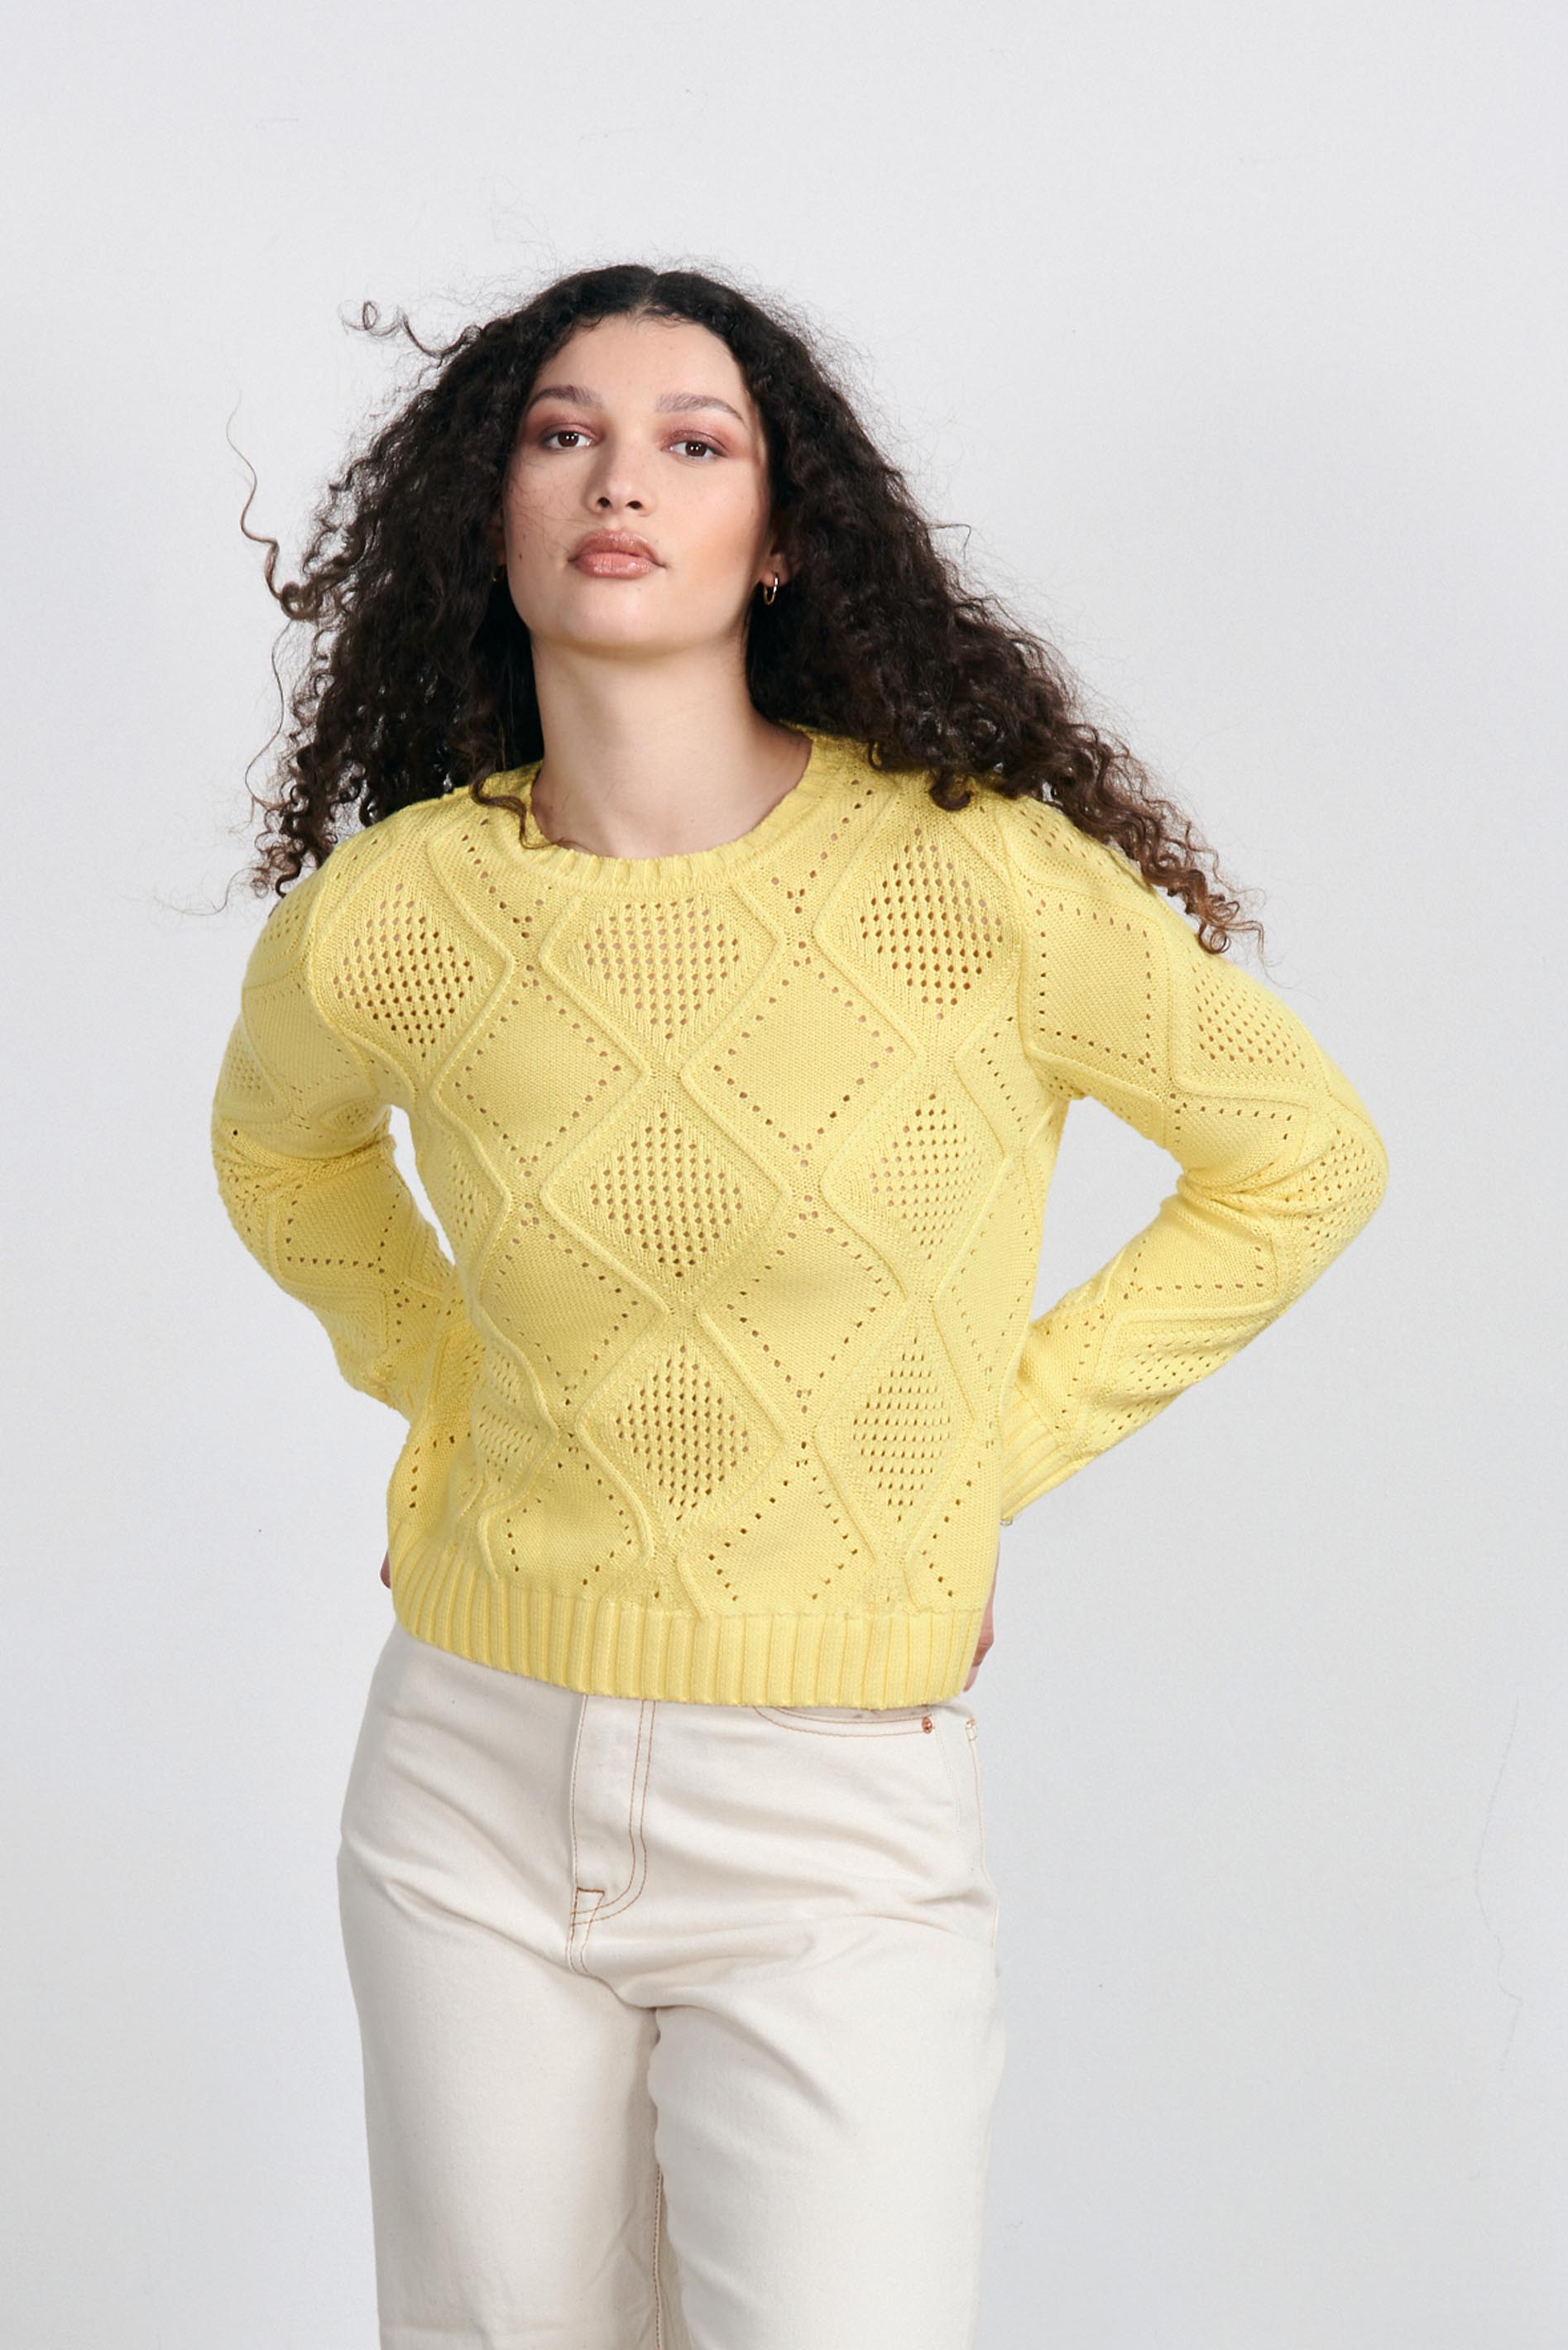 Brown haired female model wearing Jumper1234 Yellow cotton crew neck jumper with a diamond texture stitch pattern